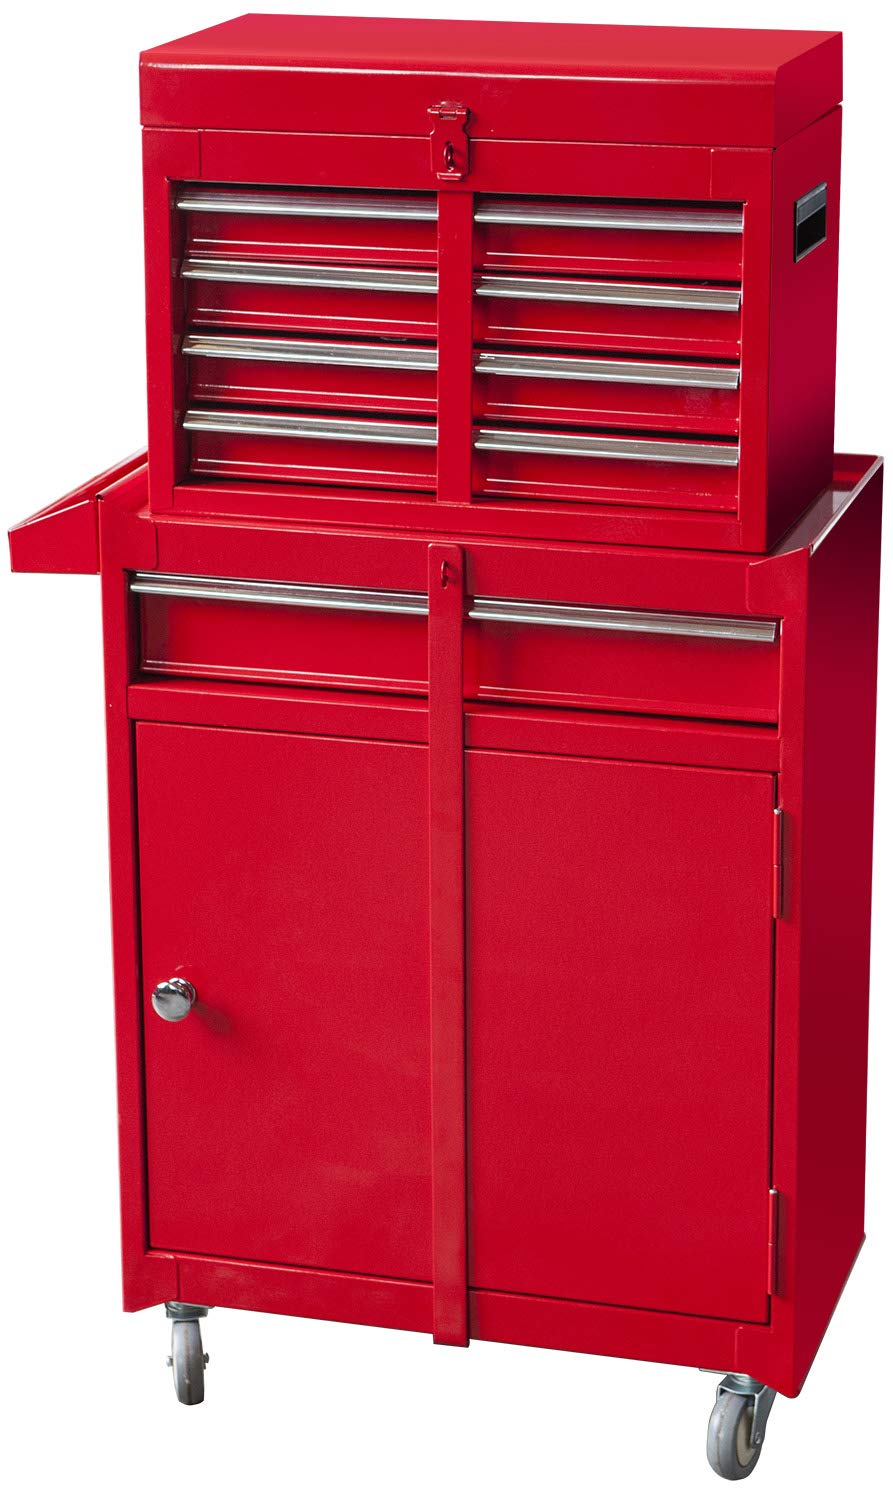 Big Red Atbt1204R-Red Detachable 4 Drawer Tool Chest With Large Storage Cabinet And Adjustable Shelf, 203 L X 11 W X 404 H